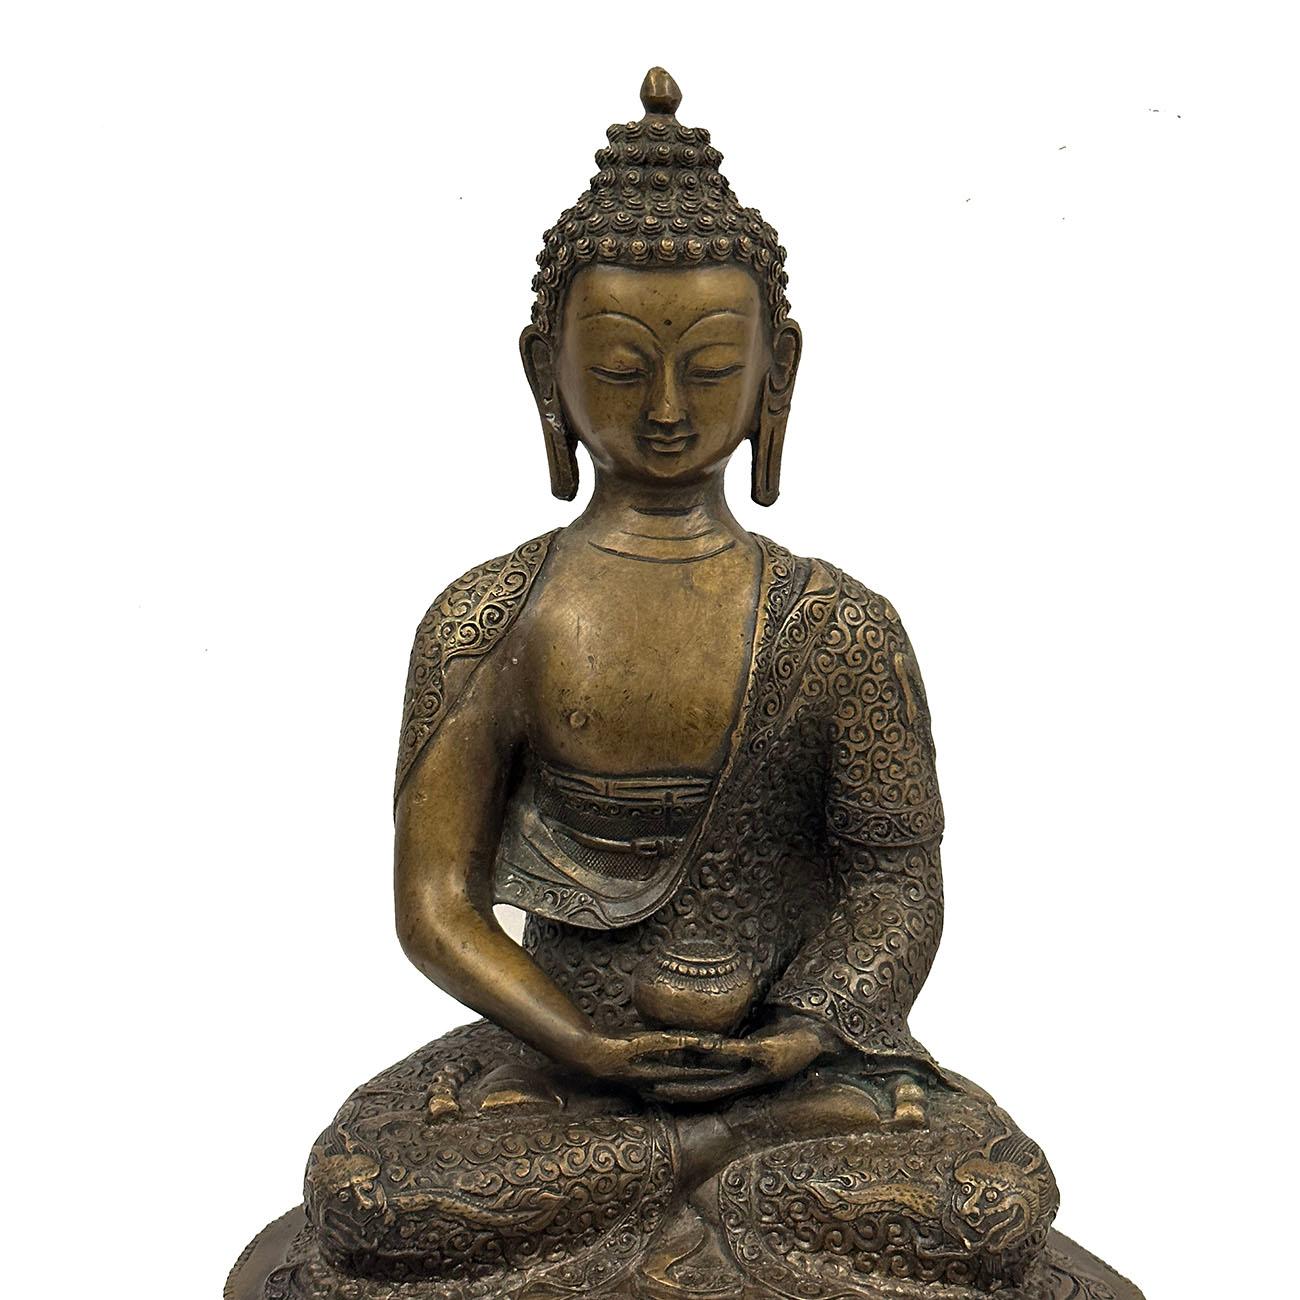 This magnificent Tibetan Antique Bronze Buddha Statuary was hand crafted from Tibetan Bronze with intricated carving works all over the Buddha. It shows the Buddha seated on a double layers lotus seat with very detailed hand carving works on it. You